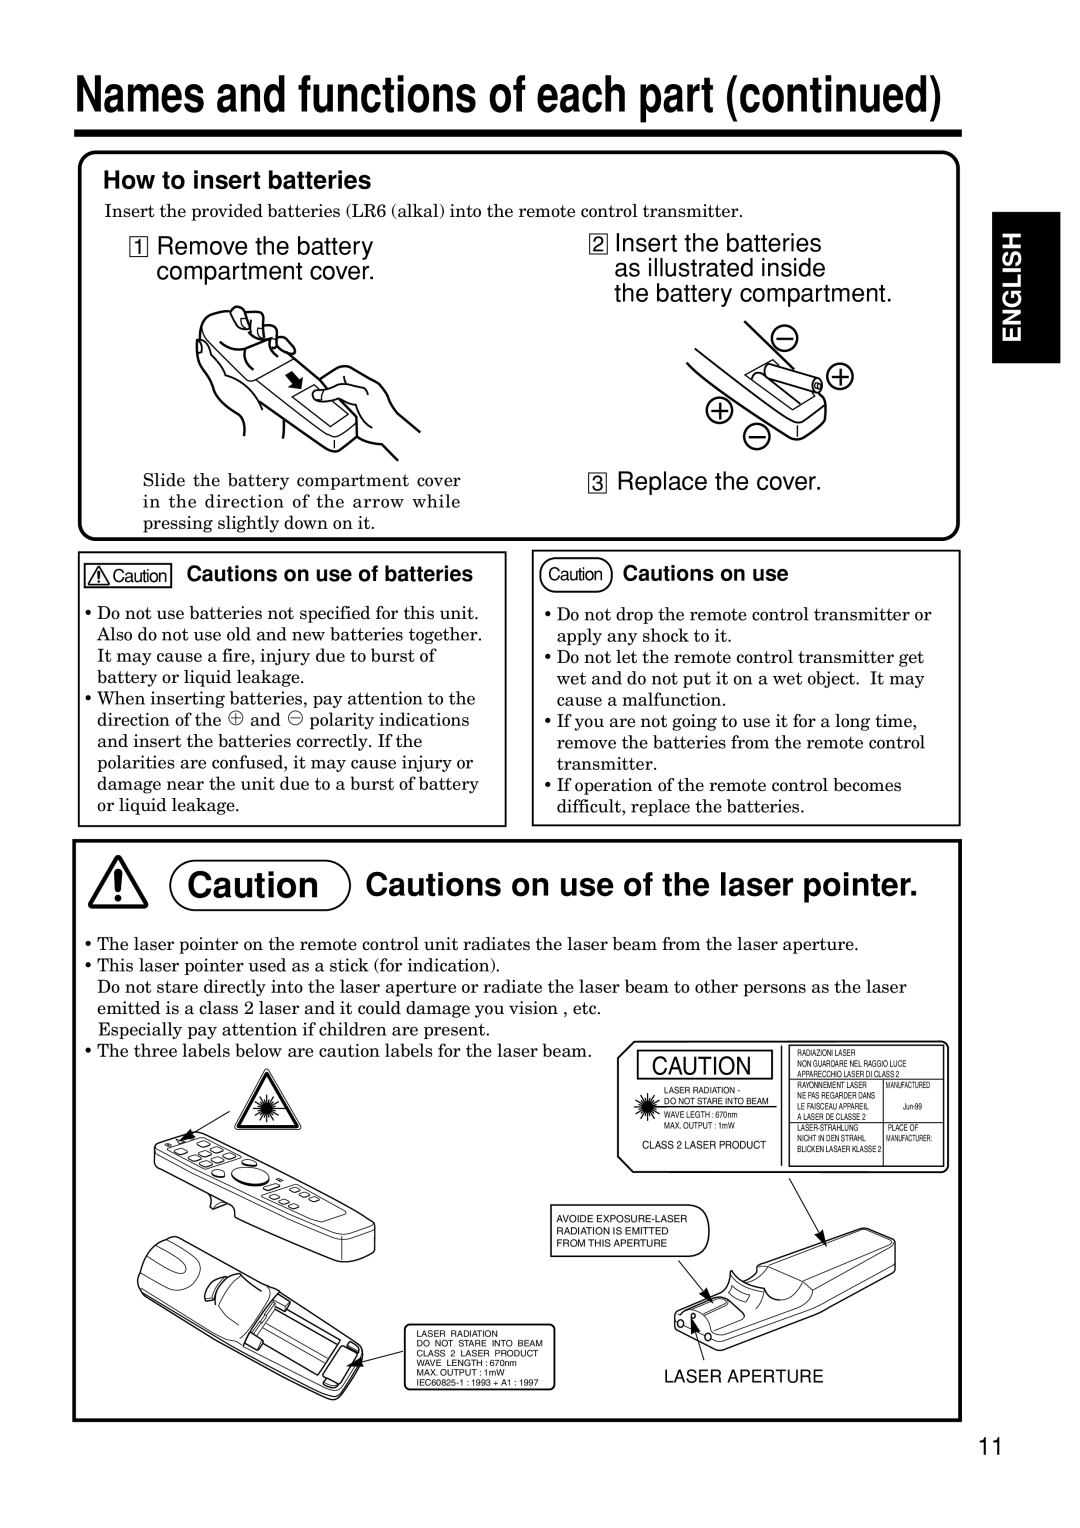 Hitachi CP-S845W Names and functions of each part continued, Caution Cautions on use of the laser pointer, English 